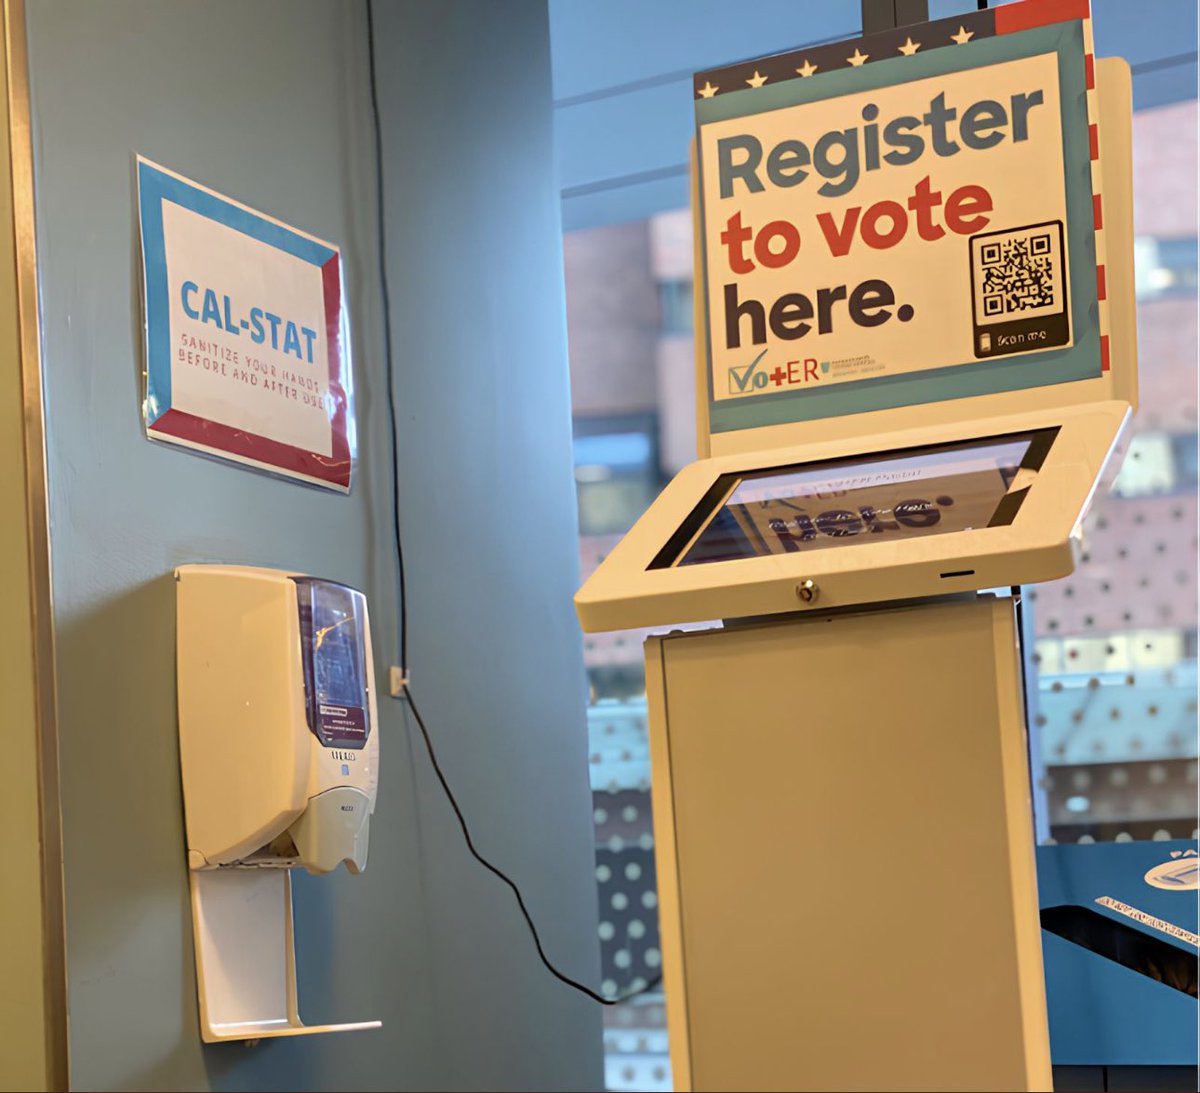 In 2019, Massachusetts General Hospital @MassGeneralEM pioneered a novel concept: a @Vot_ER_org voter registration kiosk right in its halls. Fast forward, and this fusion of healthcare and civic duty has ignited nationwide w/ partners in over 700 clinical sites.